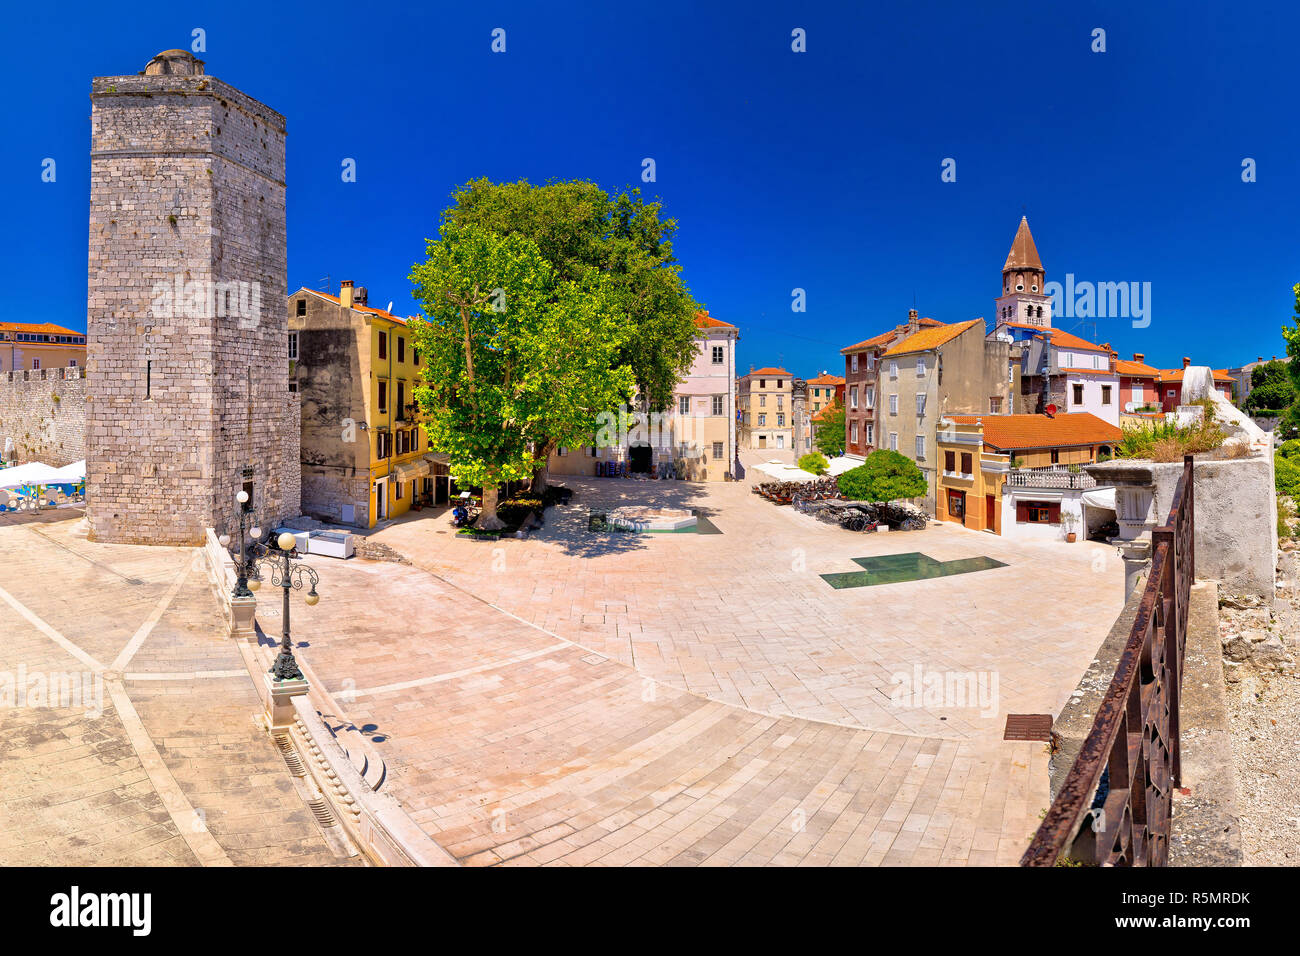 Zadar Five wells square and historic architecture panoramic view Stock Photo